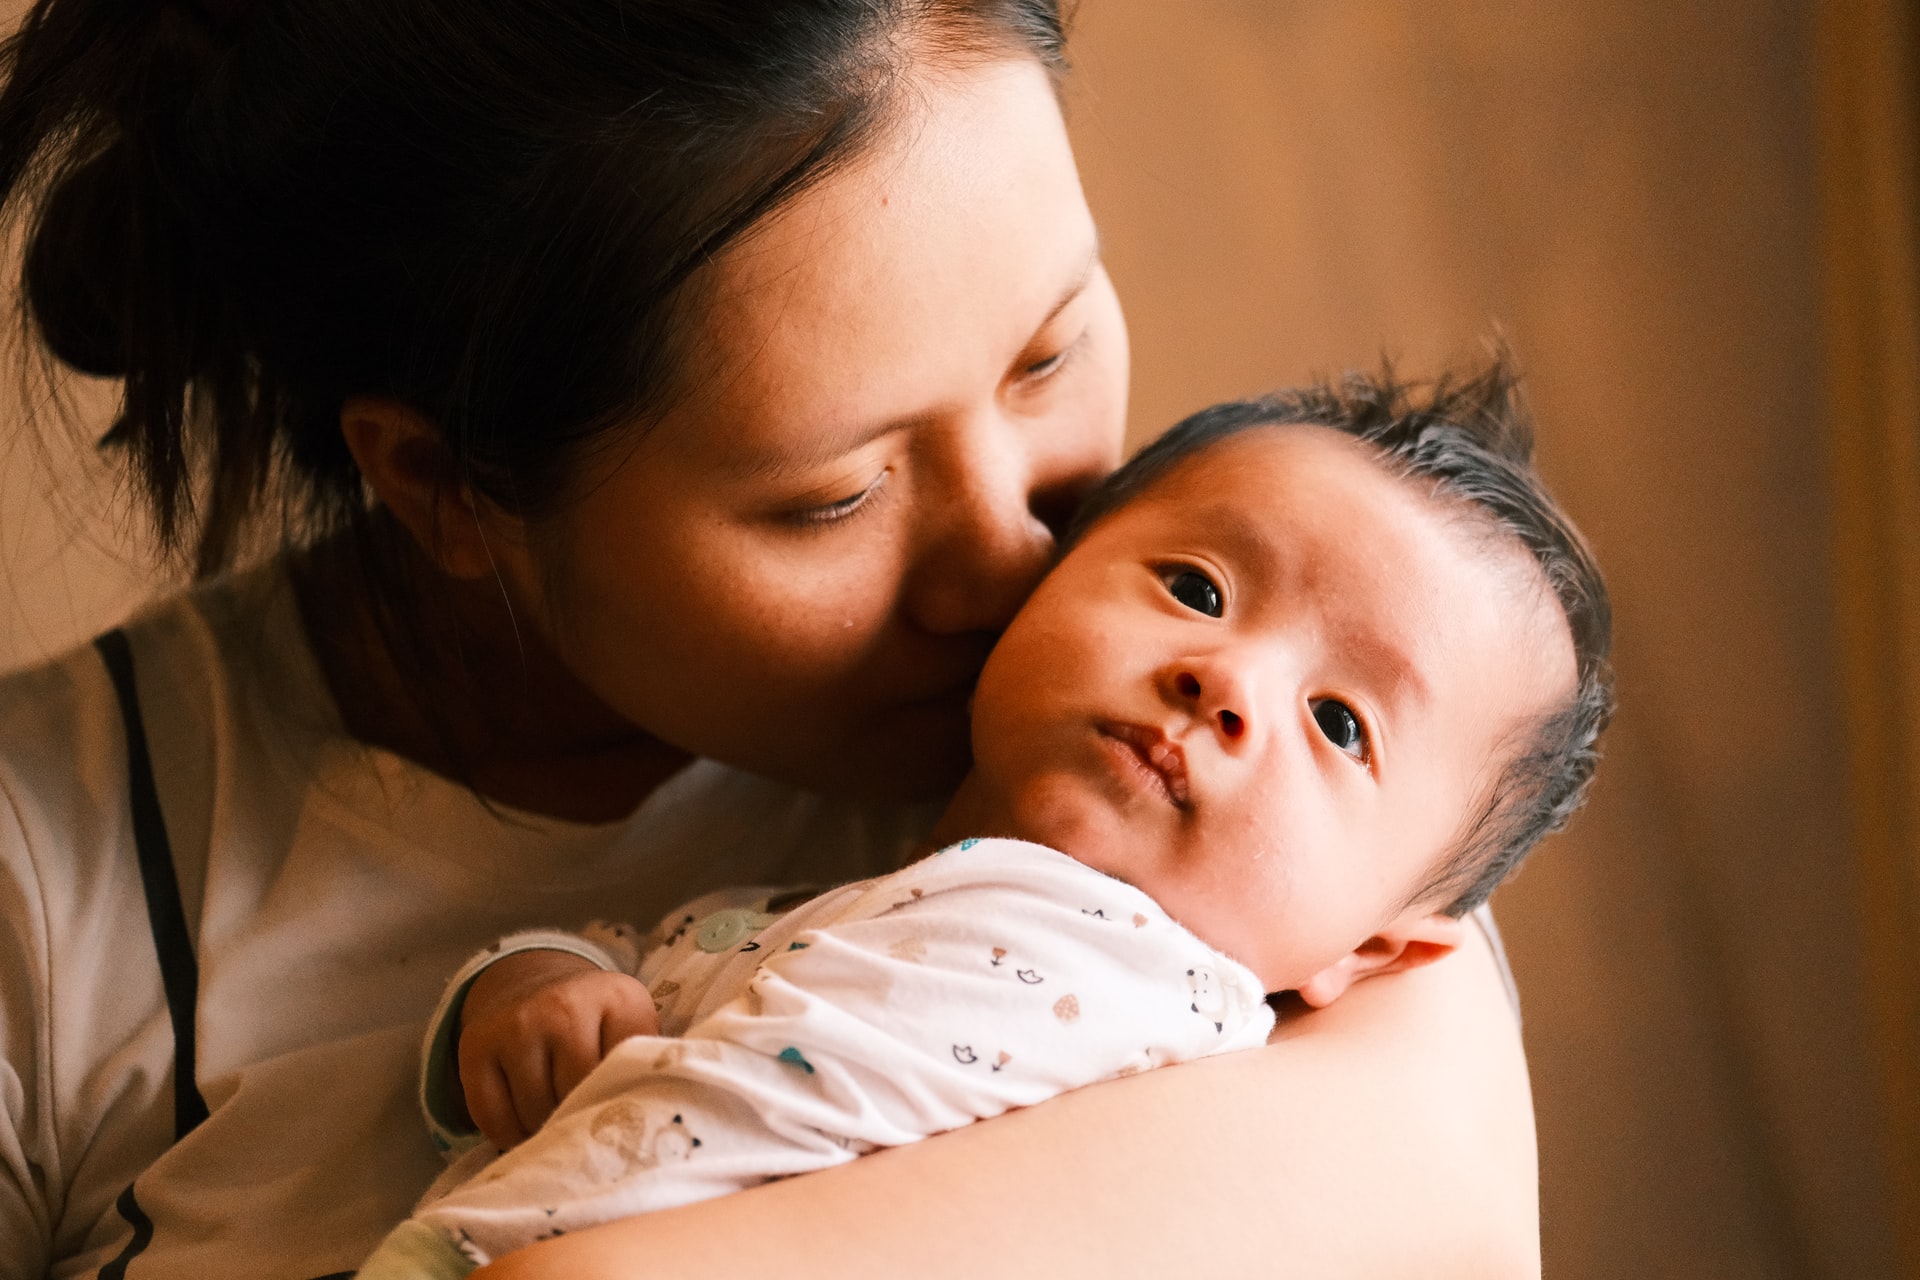 Mother and a baby. Photo: Huanshi / Unsplash